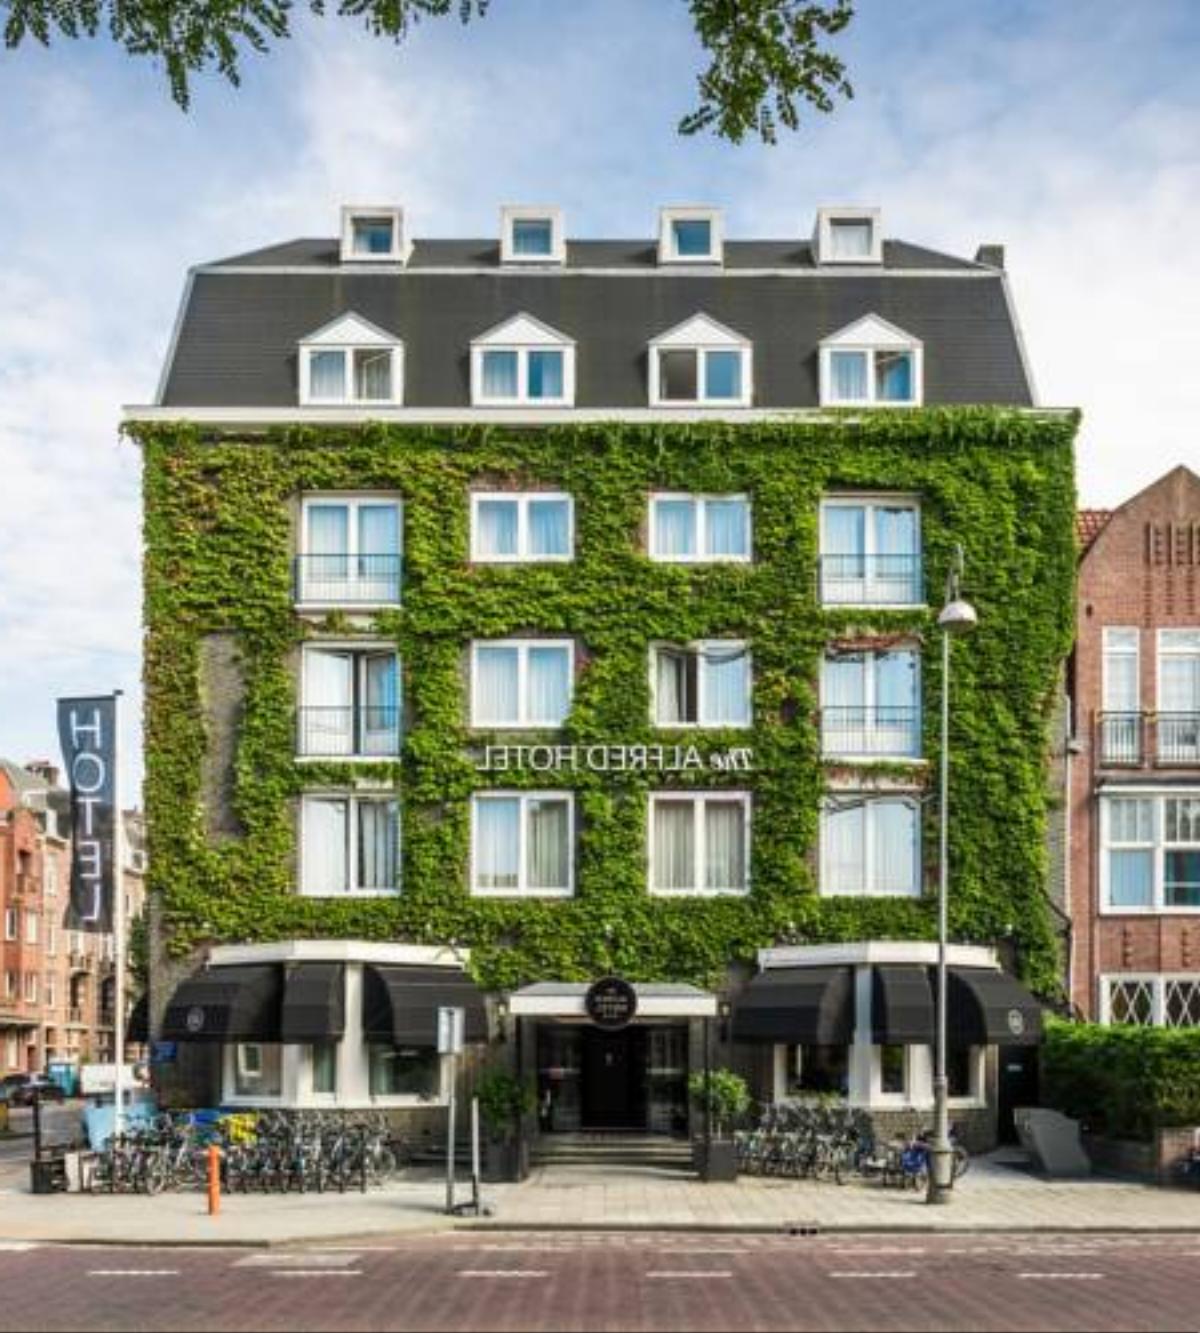 The Alfred Hotel Hotel Amsterdam Netherlands